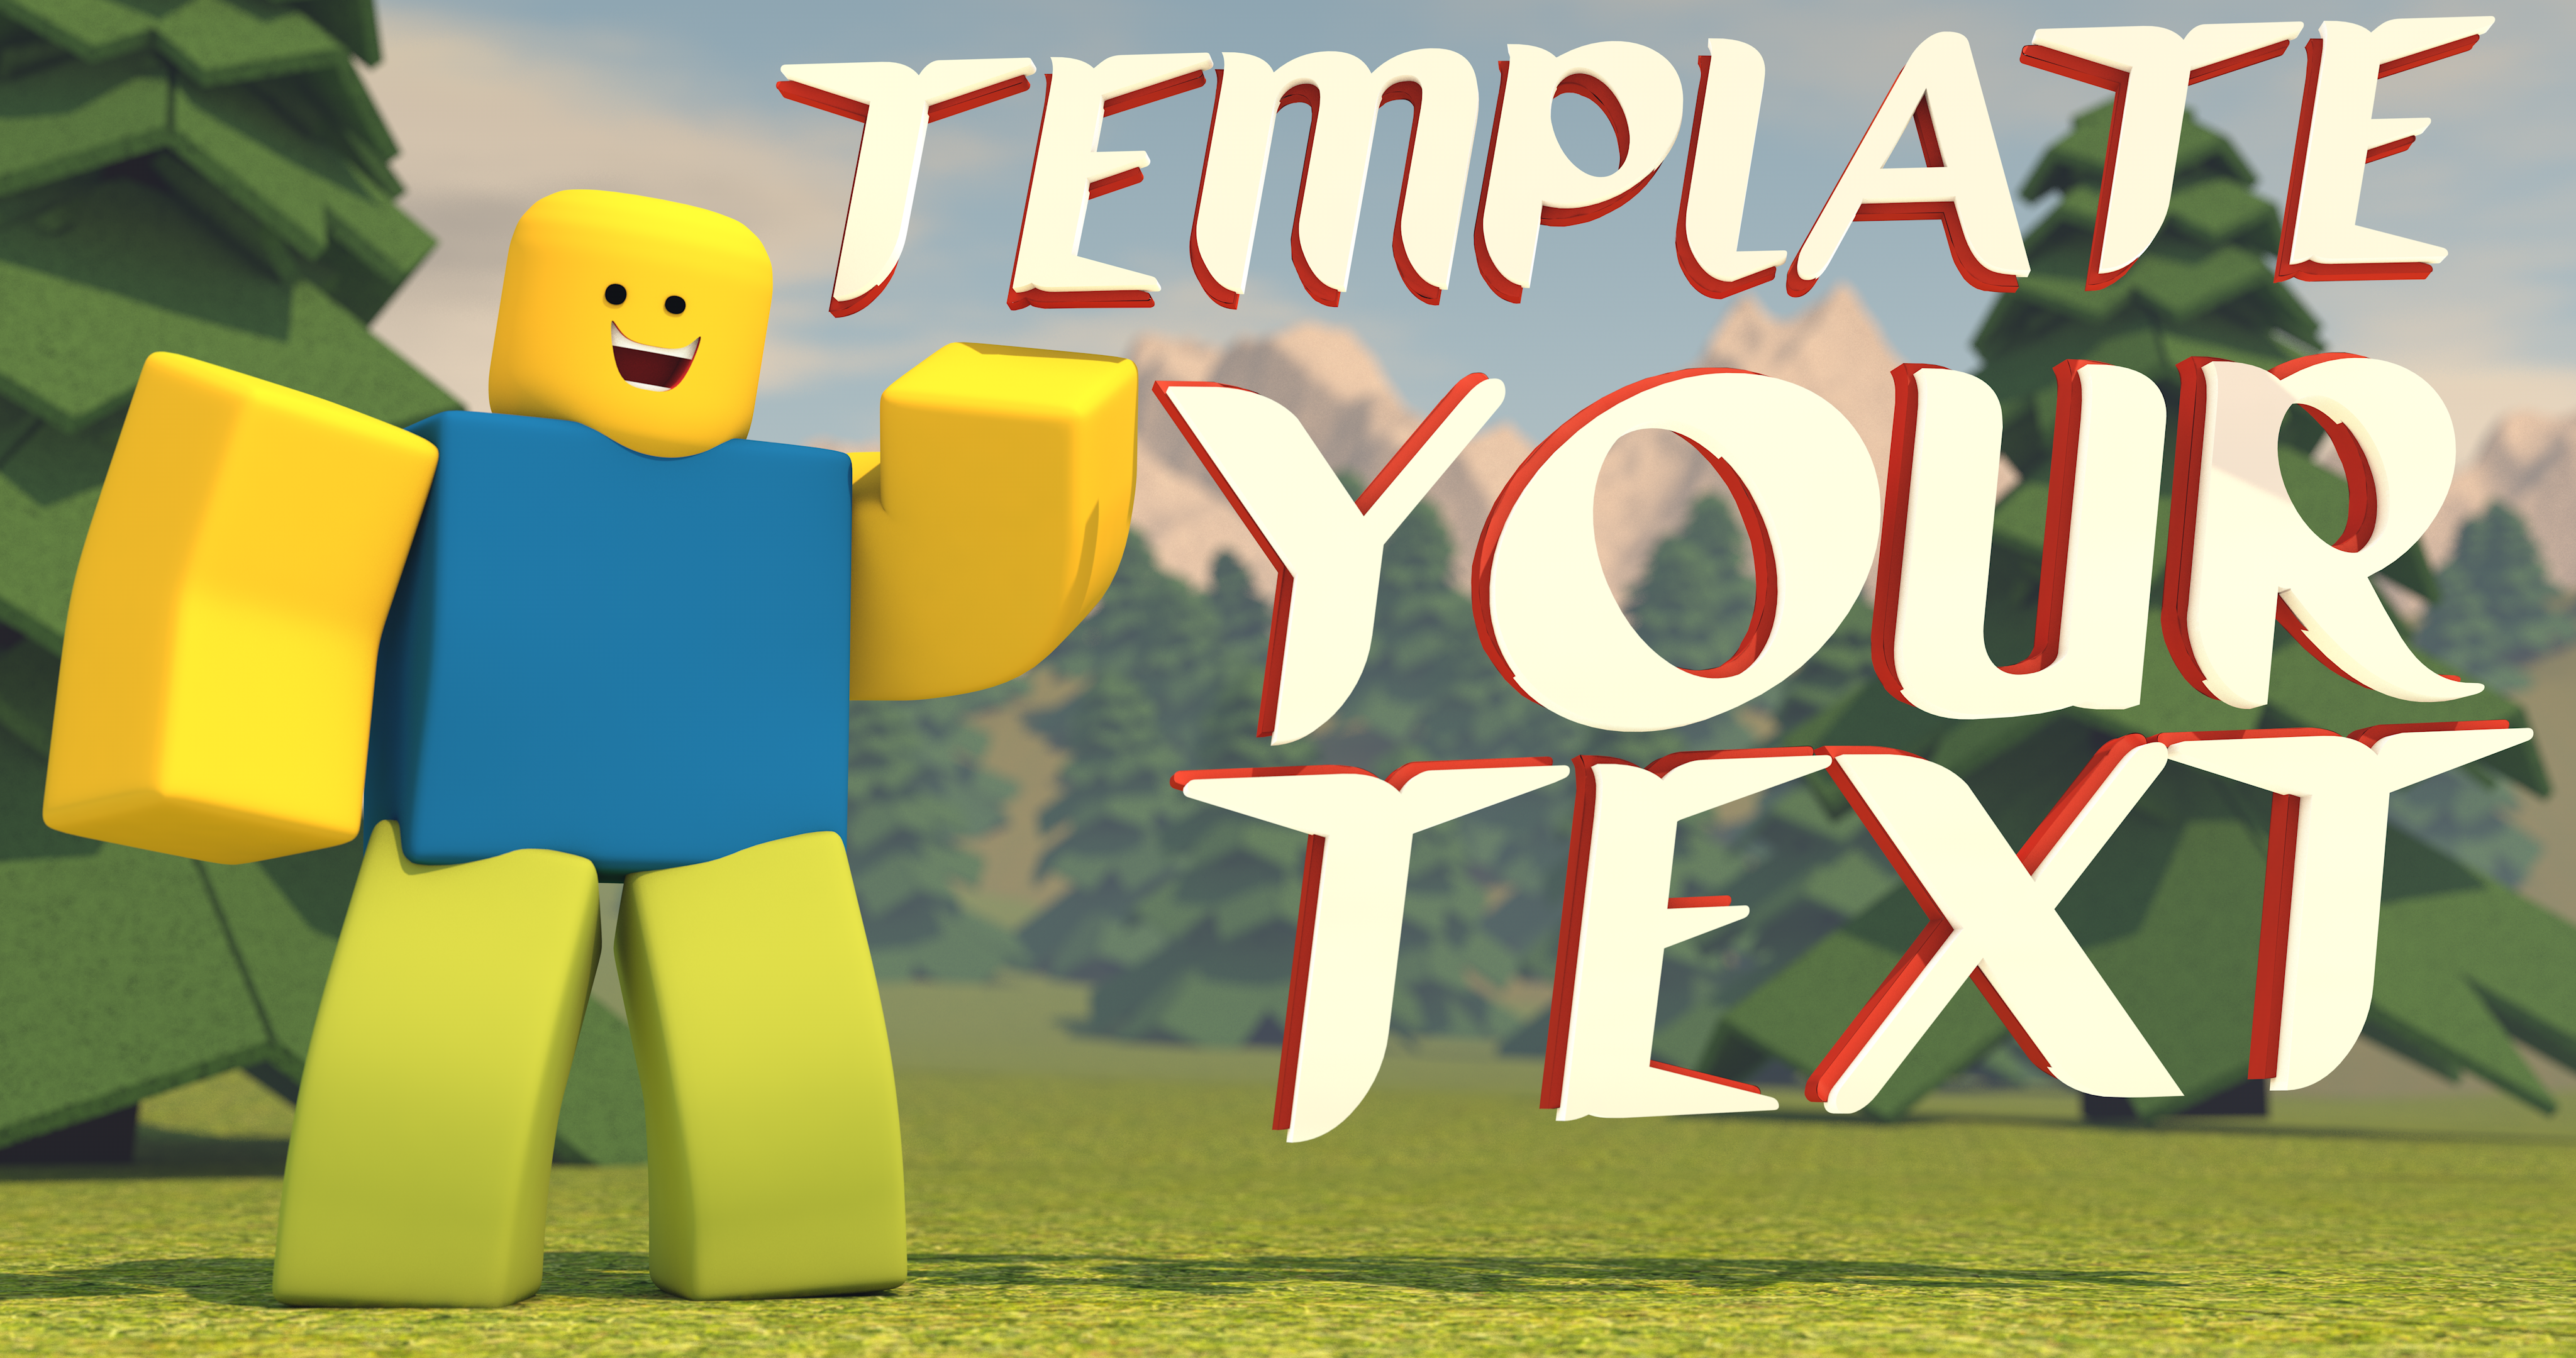 Comission Roblox Thumbnail Template Low Price By Buleredits On Deviantart - roblox thumbnail dimensions